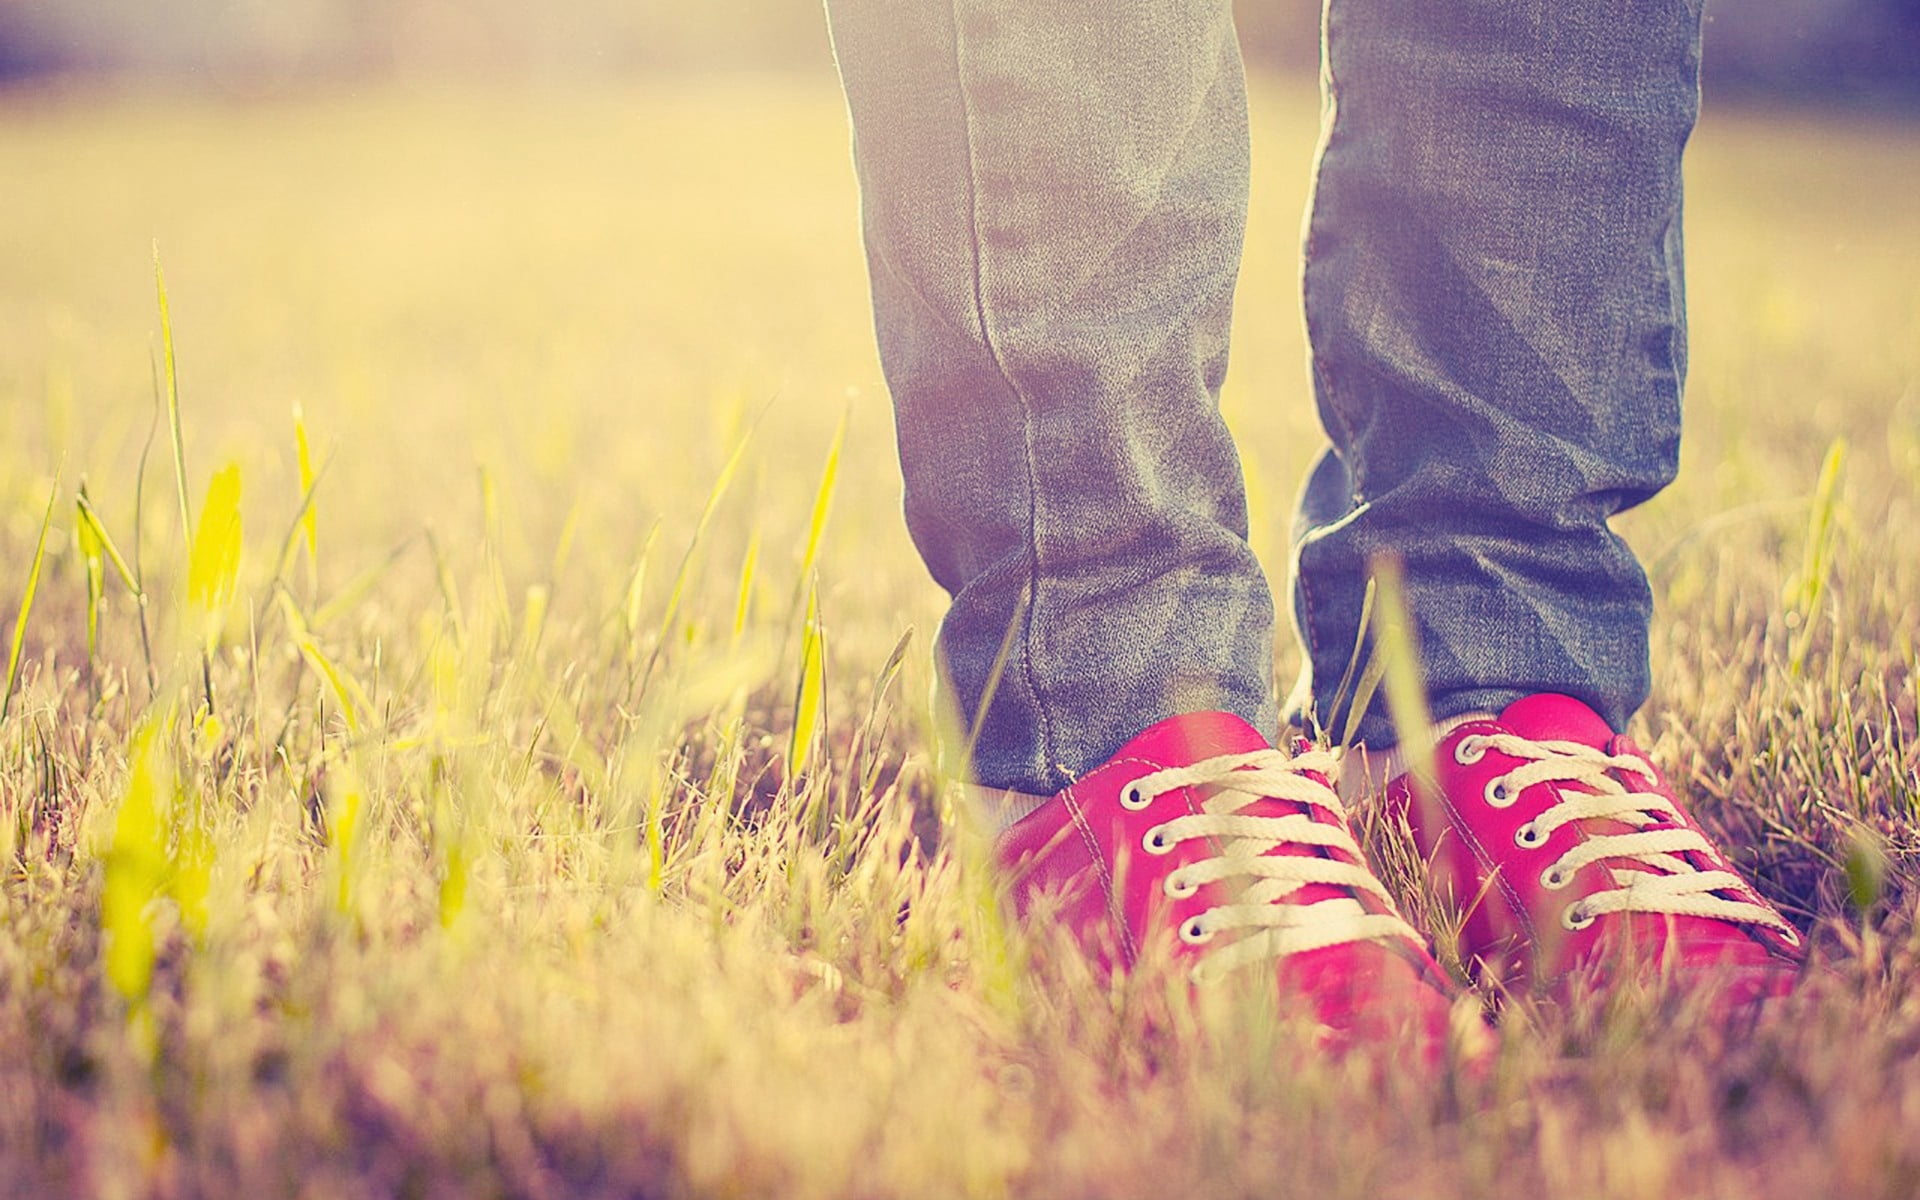 pair of white-and-red low-top sneakers, feet, grass, light, shoes